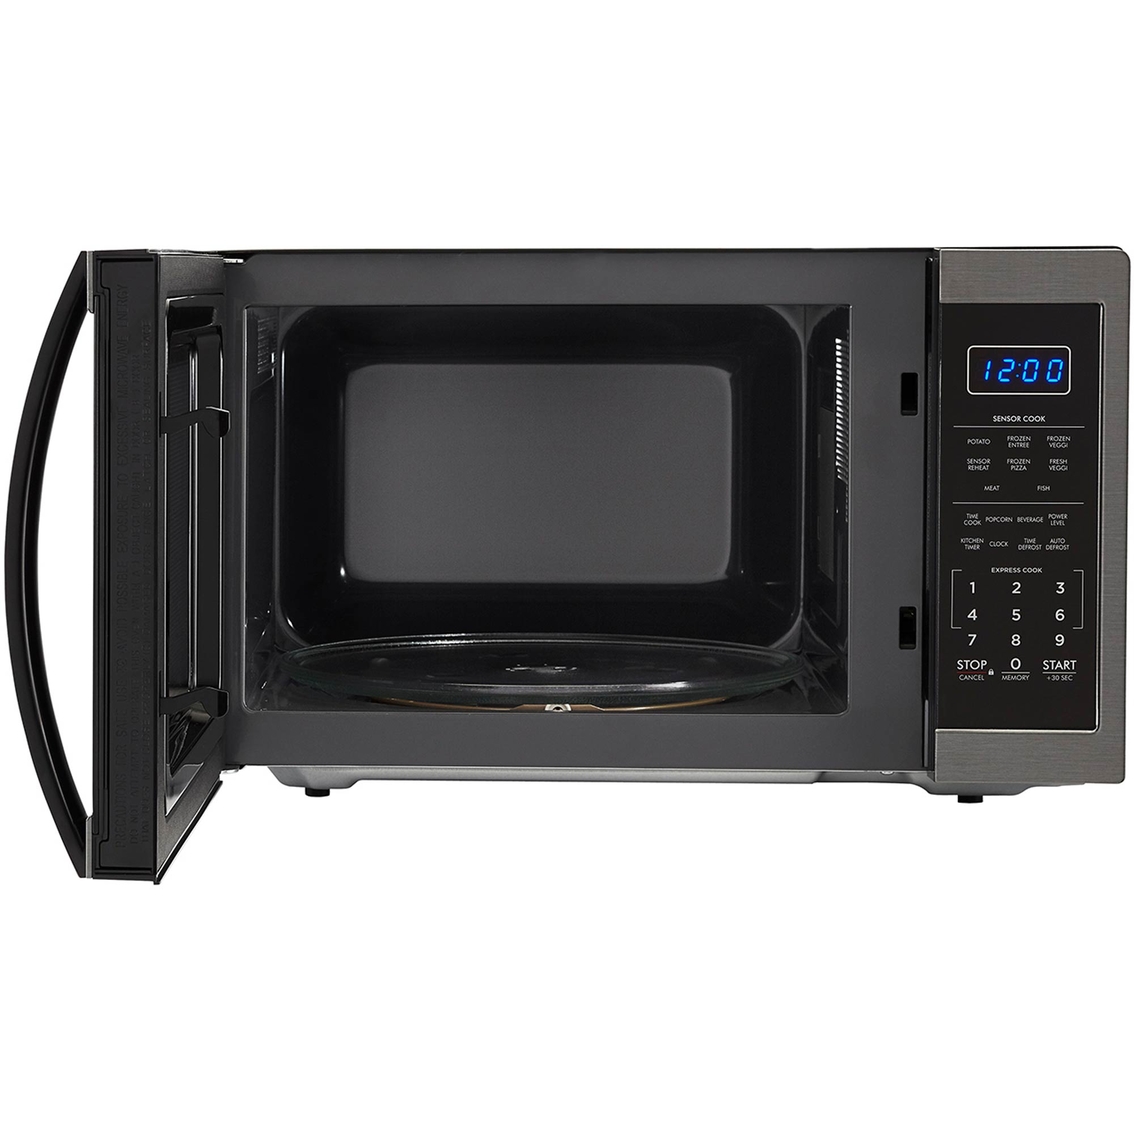 Sharp 1.4 cu. ft. Microwave Oven in Black Stainless Finish - Image 2 of 4